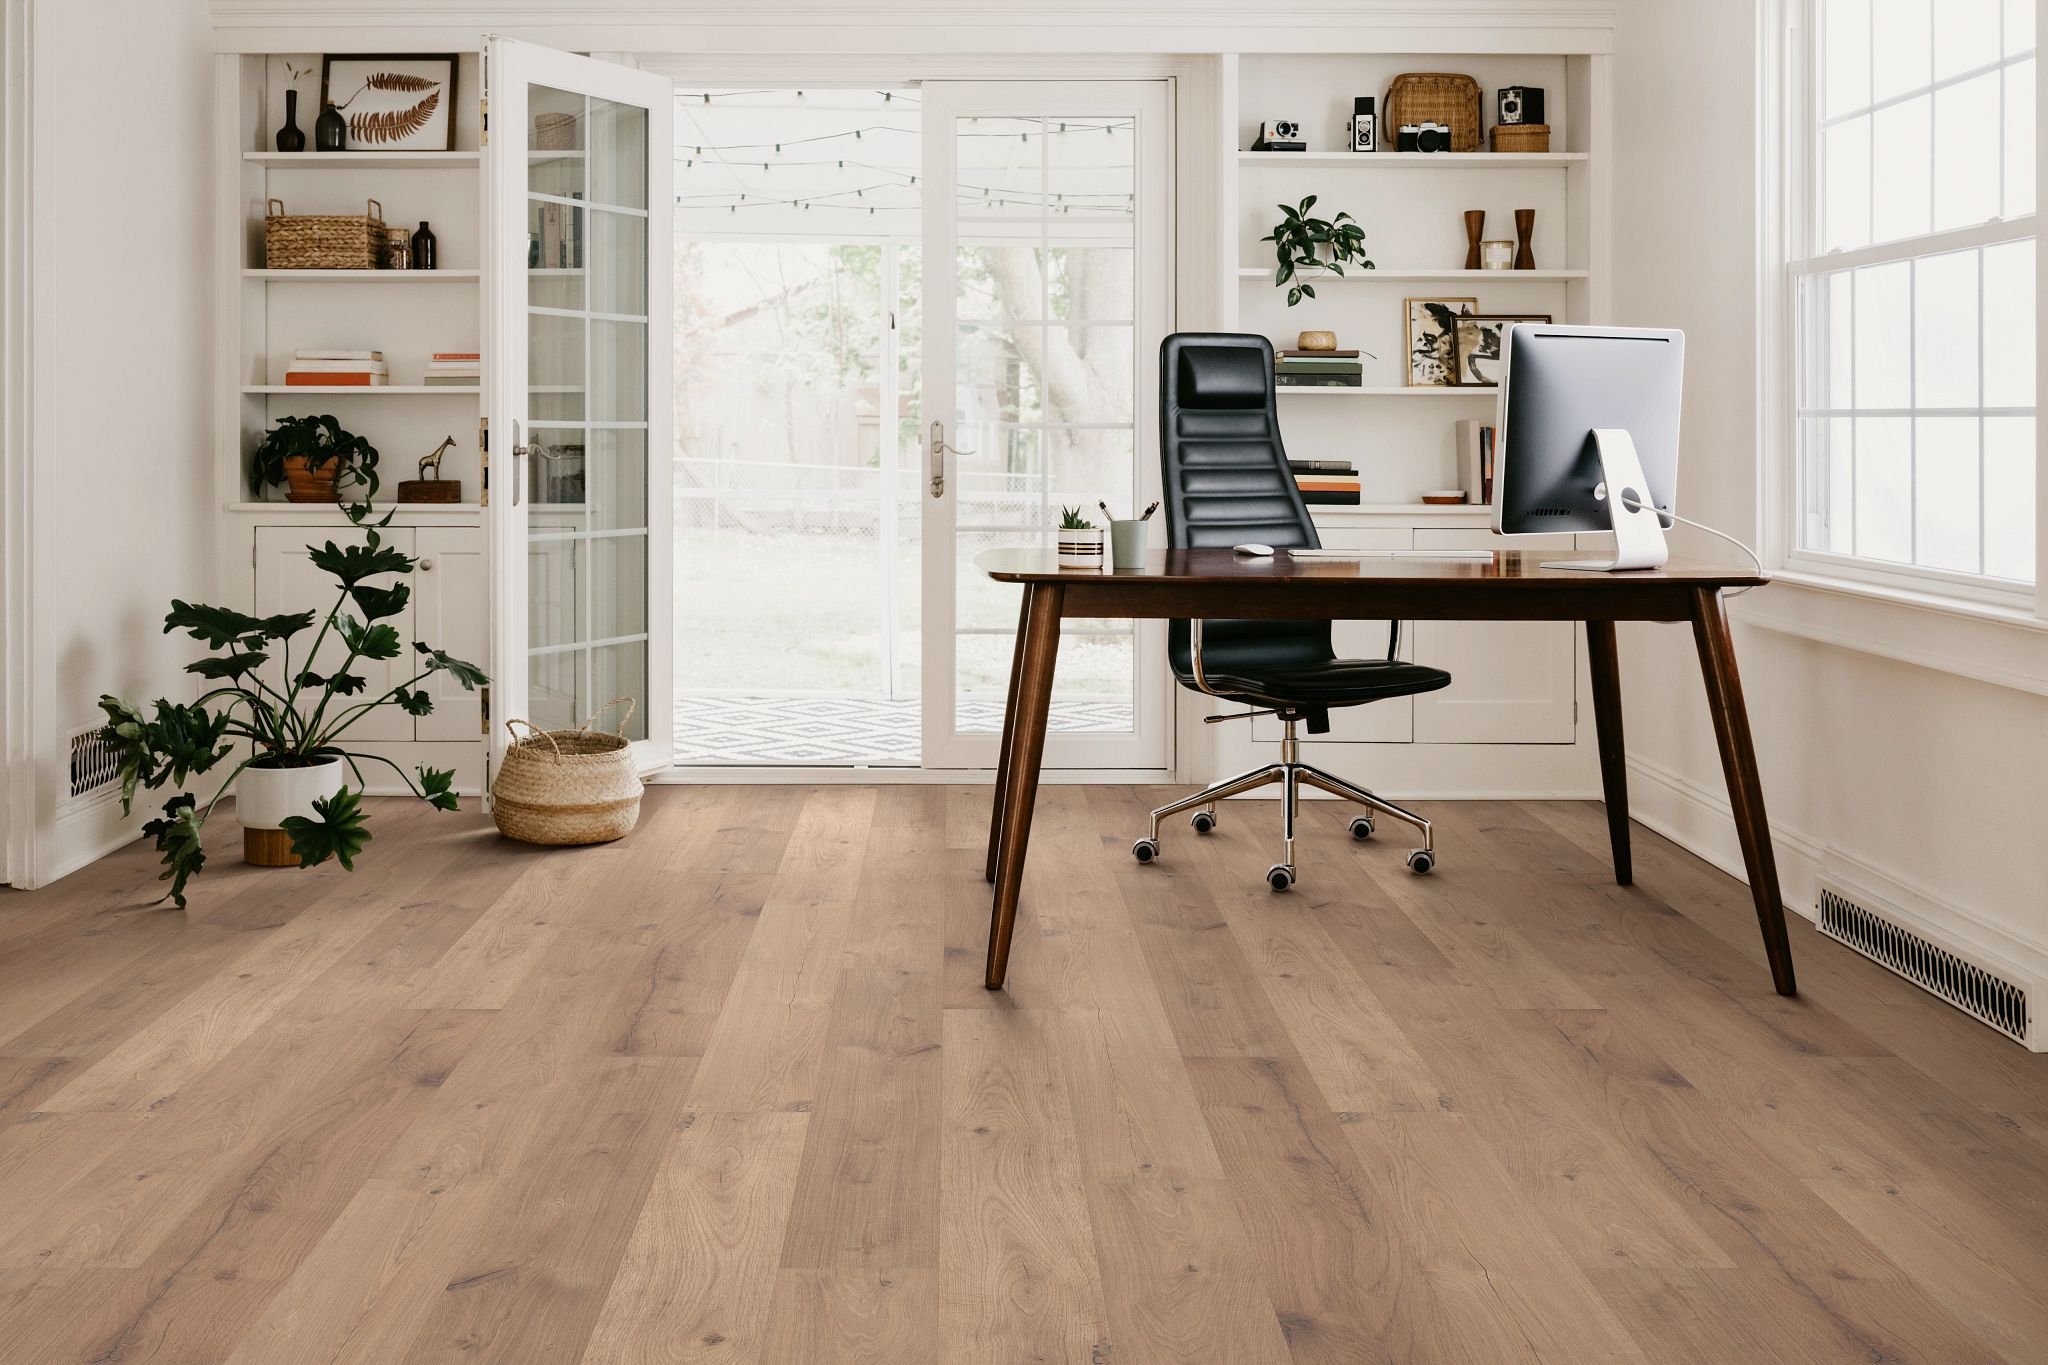 Office space with wood-look laminate flooring from Carpet Plus in the Worthington, MN area